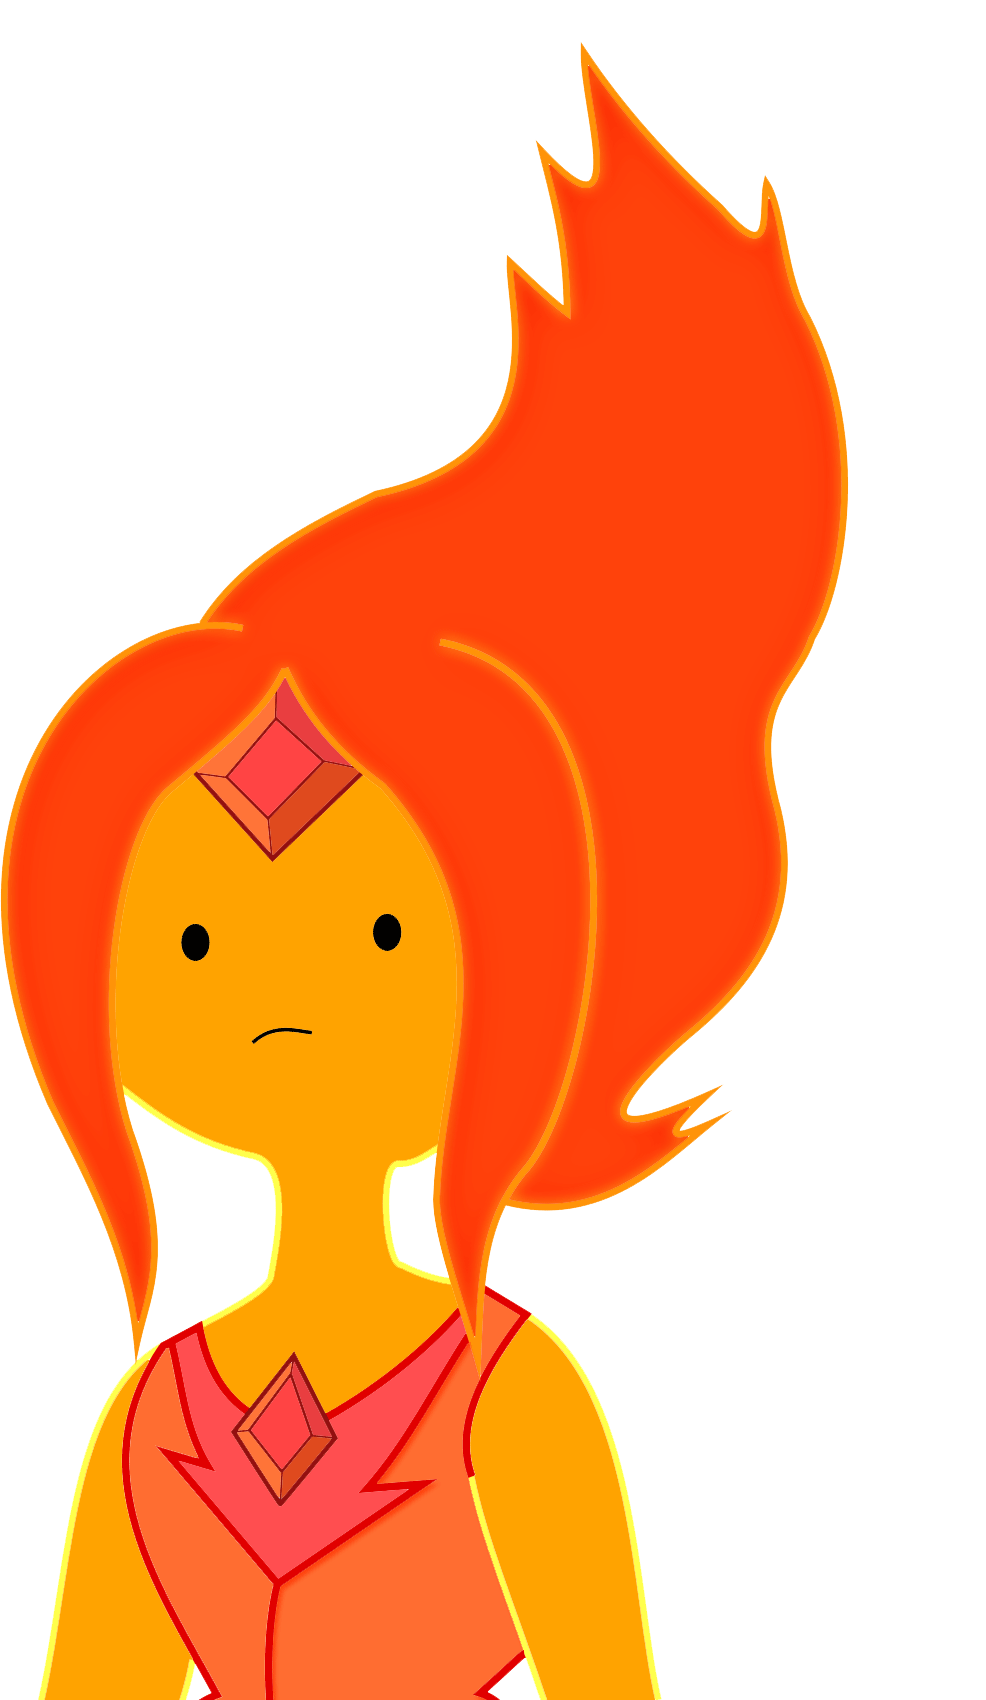 Flame character